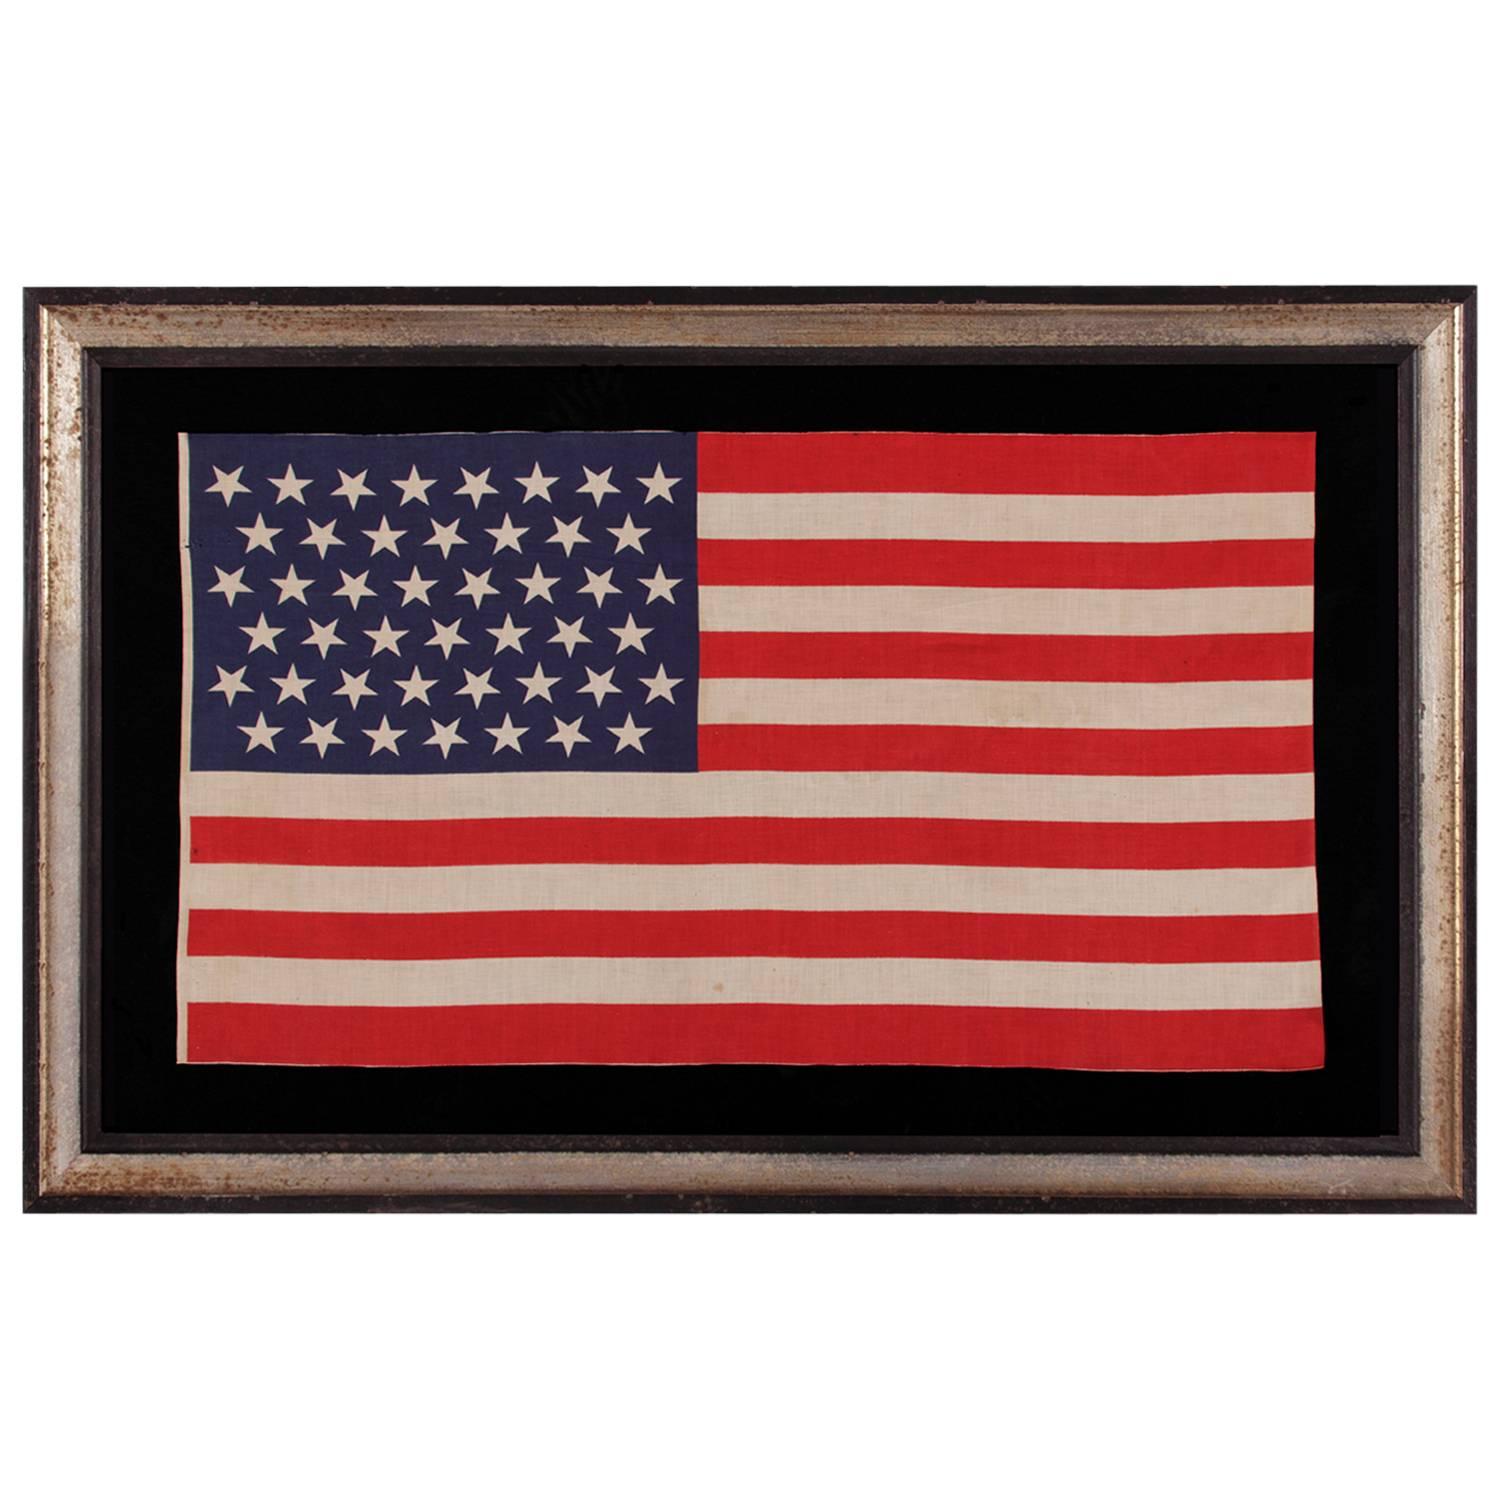 45 Star American Parade Flag with Dancing Stars, Large Scale, Utah Statehood